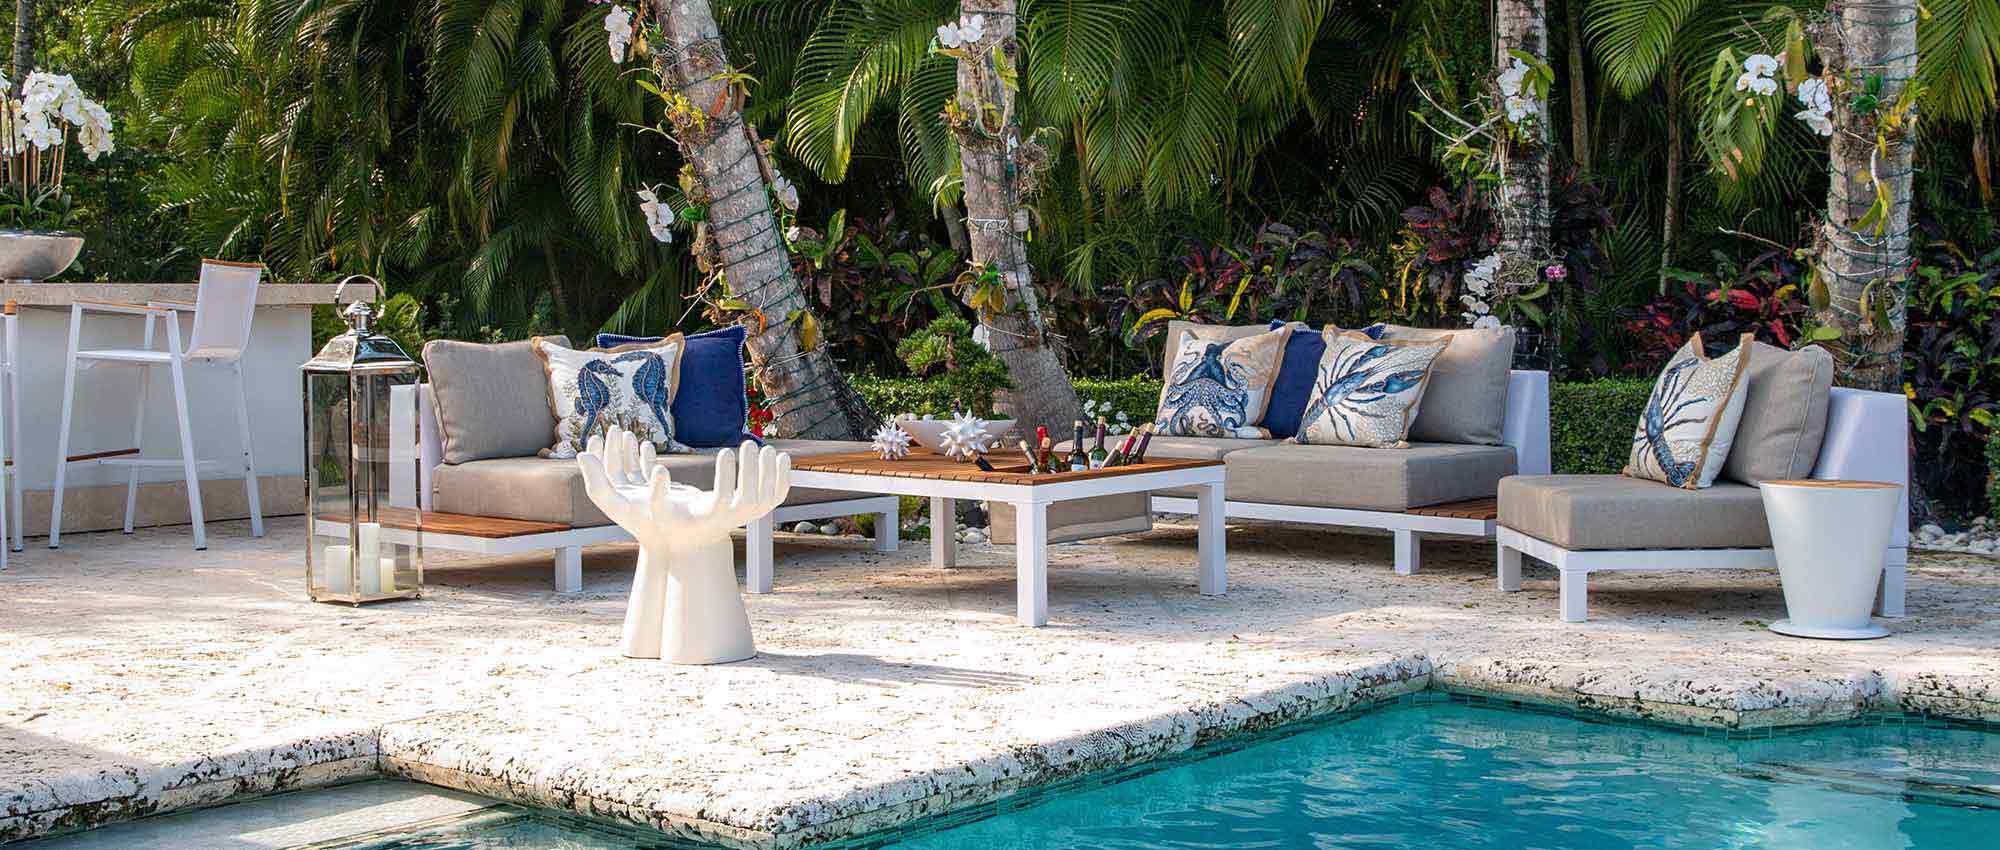 A modern outdoor lounging furniture set with a sofa, two gray chairs, and a teak top coffee table. The furniture is made of weather-resistant materials, and it is designed to be comfortable and stylish. The furniture is placed on a patio, and there is a view of a pool and lush landscaping.